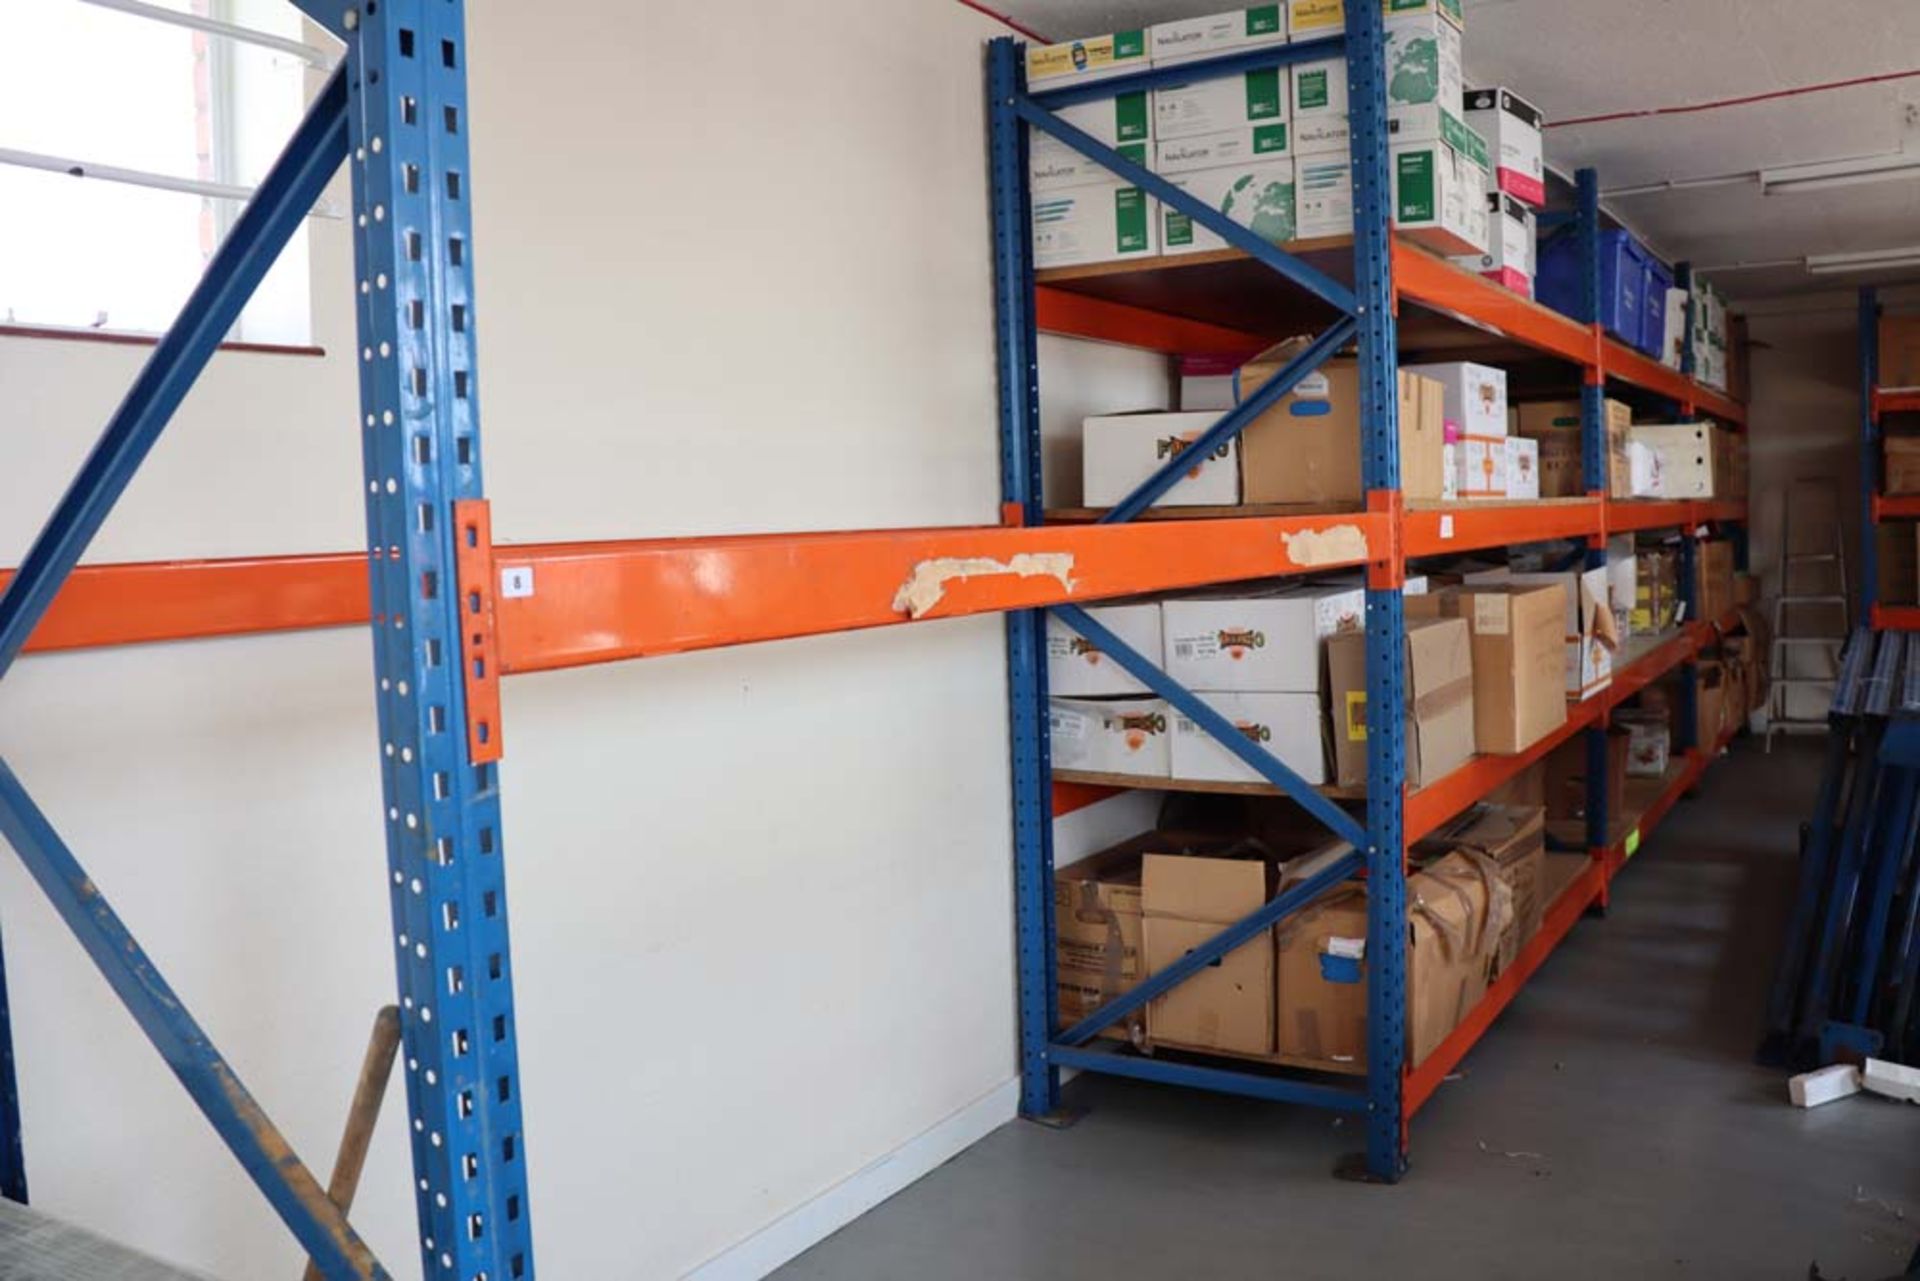 6 running bays of pallet racking, with 9 x 2.5 metre uprights and approximately 36 x 2.4 metre beams